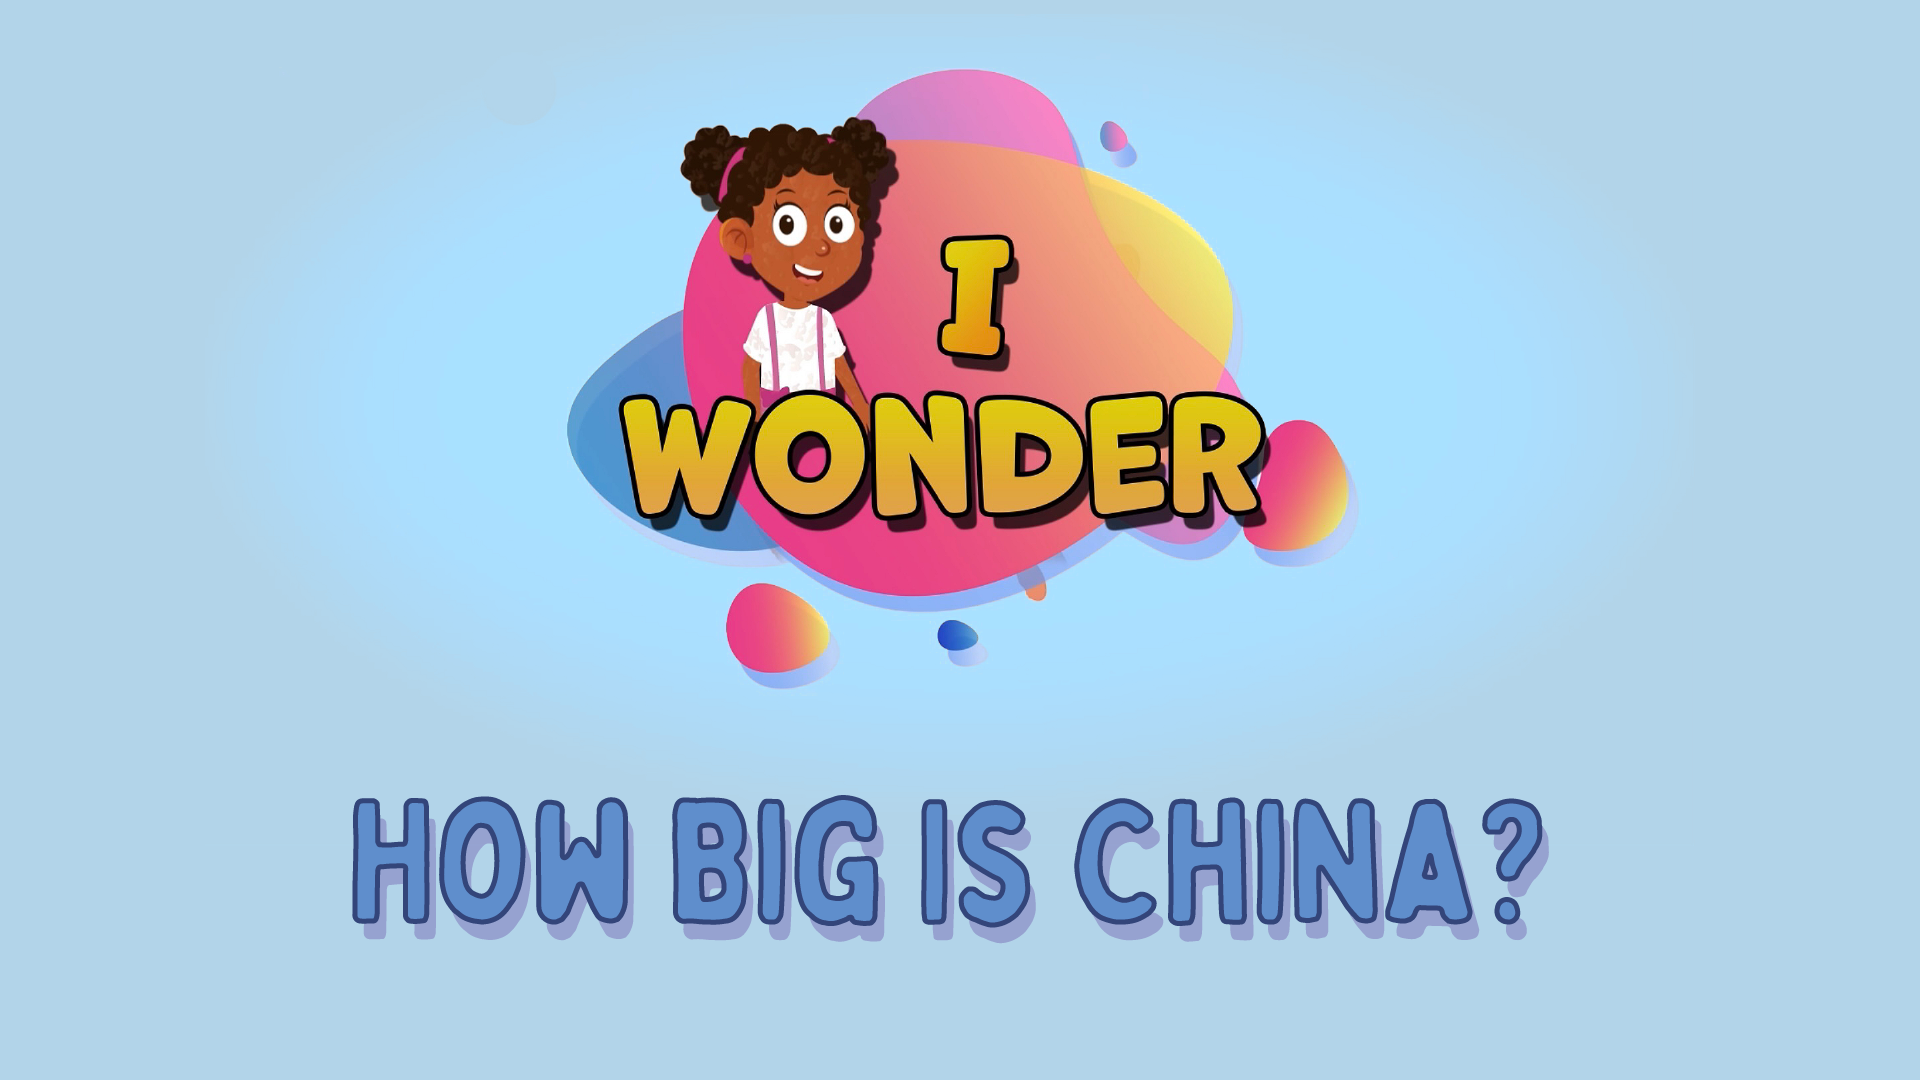 How Big Is China?